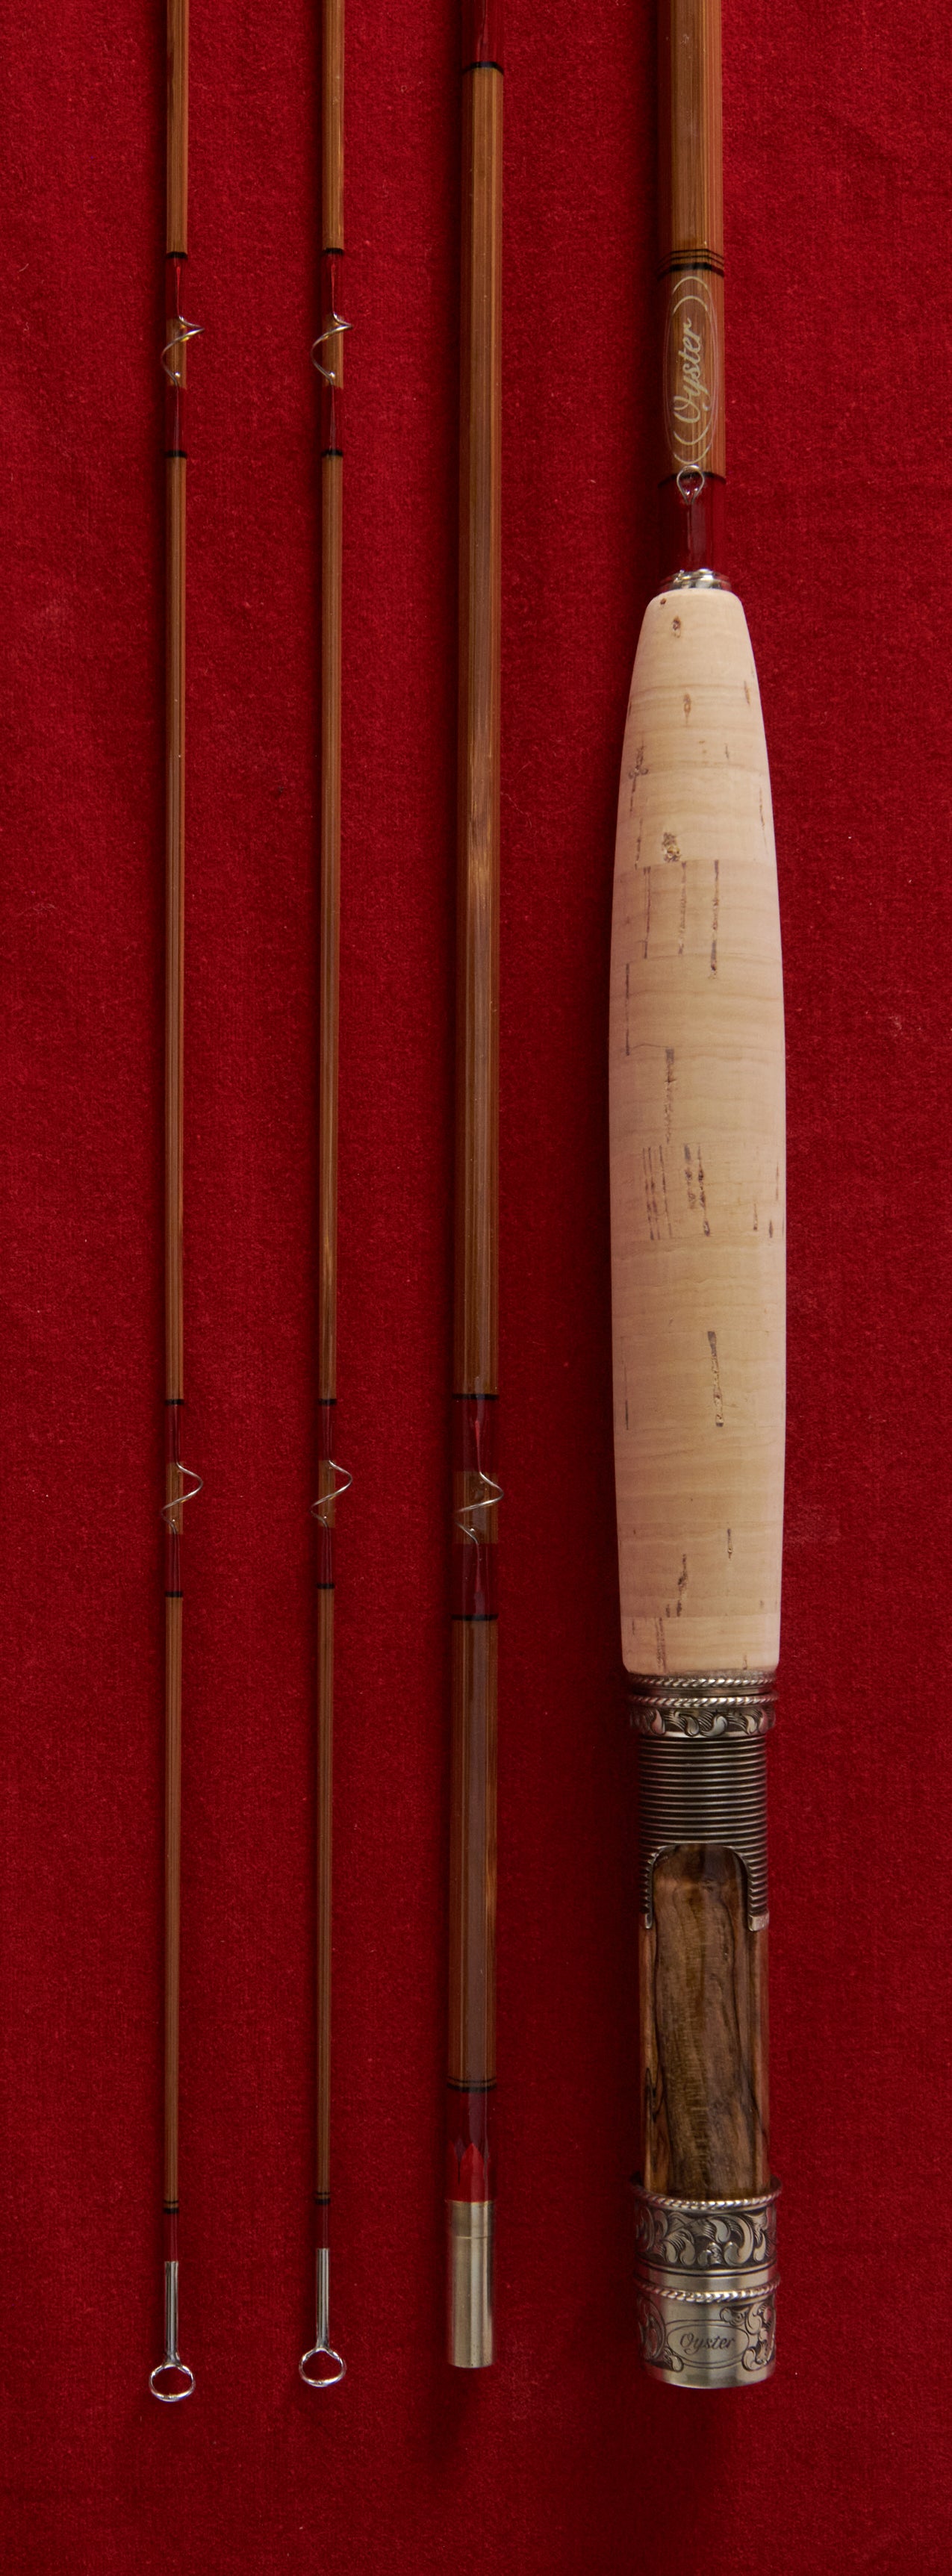 files/7ft_9in_5wt_Oyster_Bamboo_Fly_Rod_Master_Series.jpg